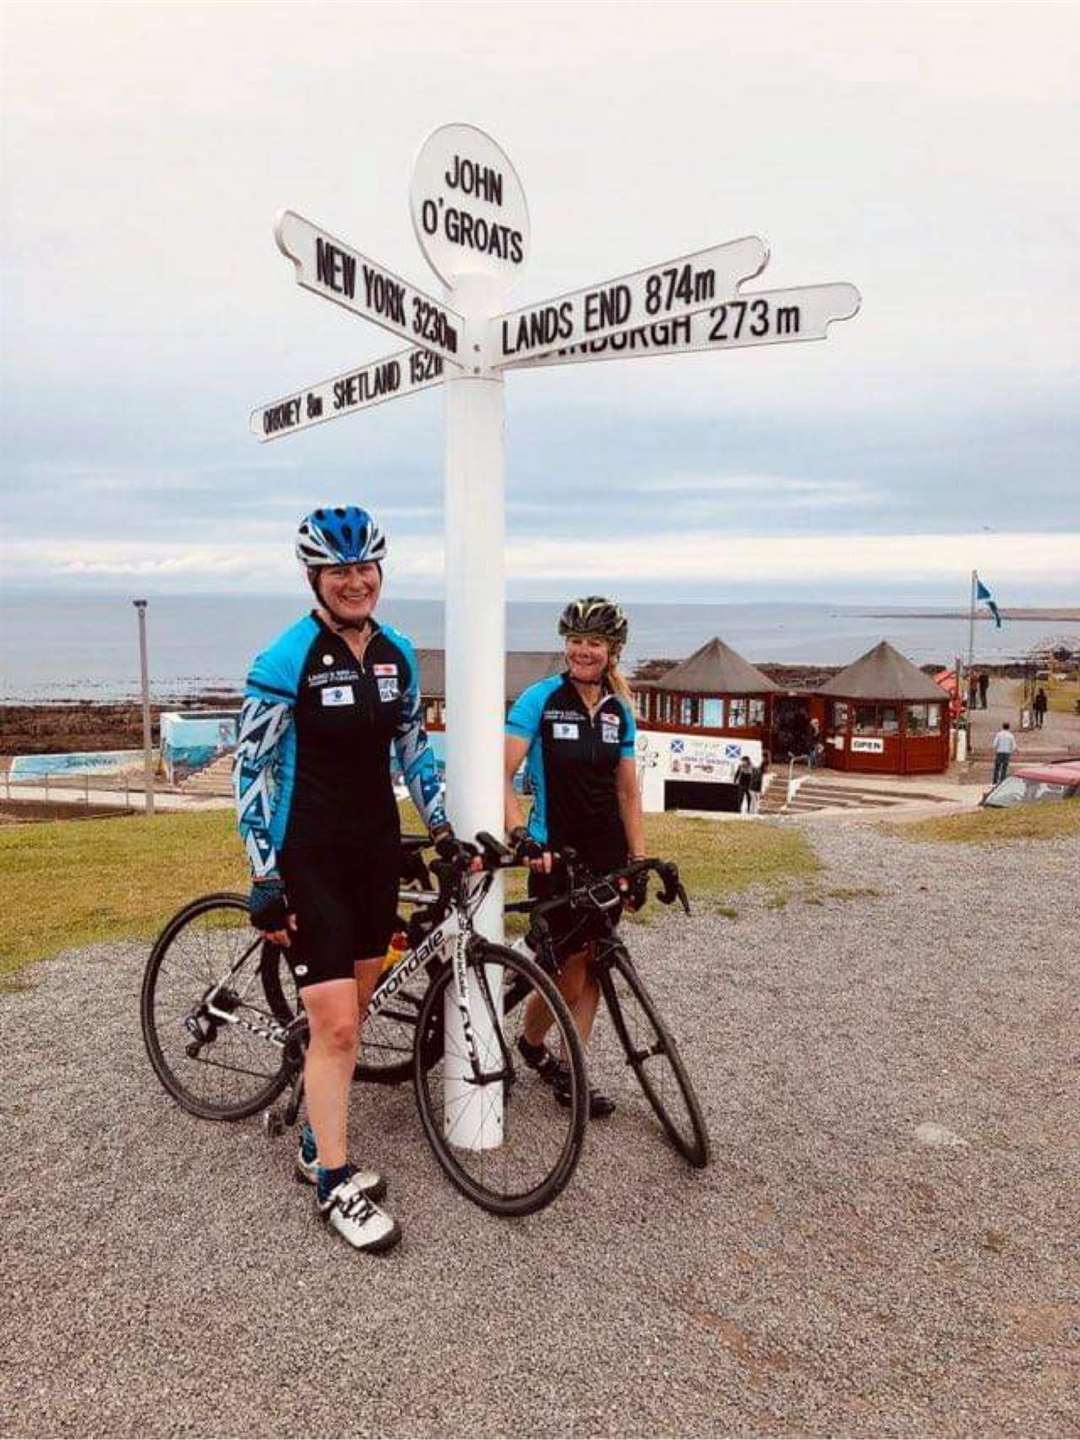 Maddy and Jo delighted to reach John O'Groats as they complete the Wheelie Wheelie Big Ride.